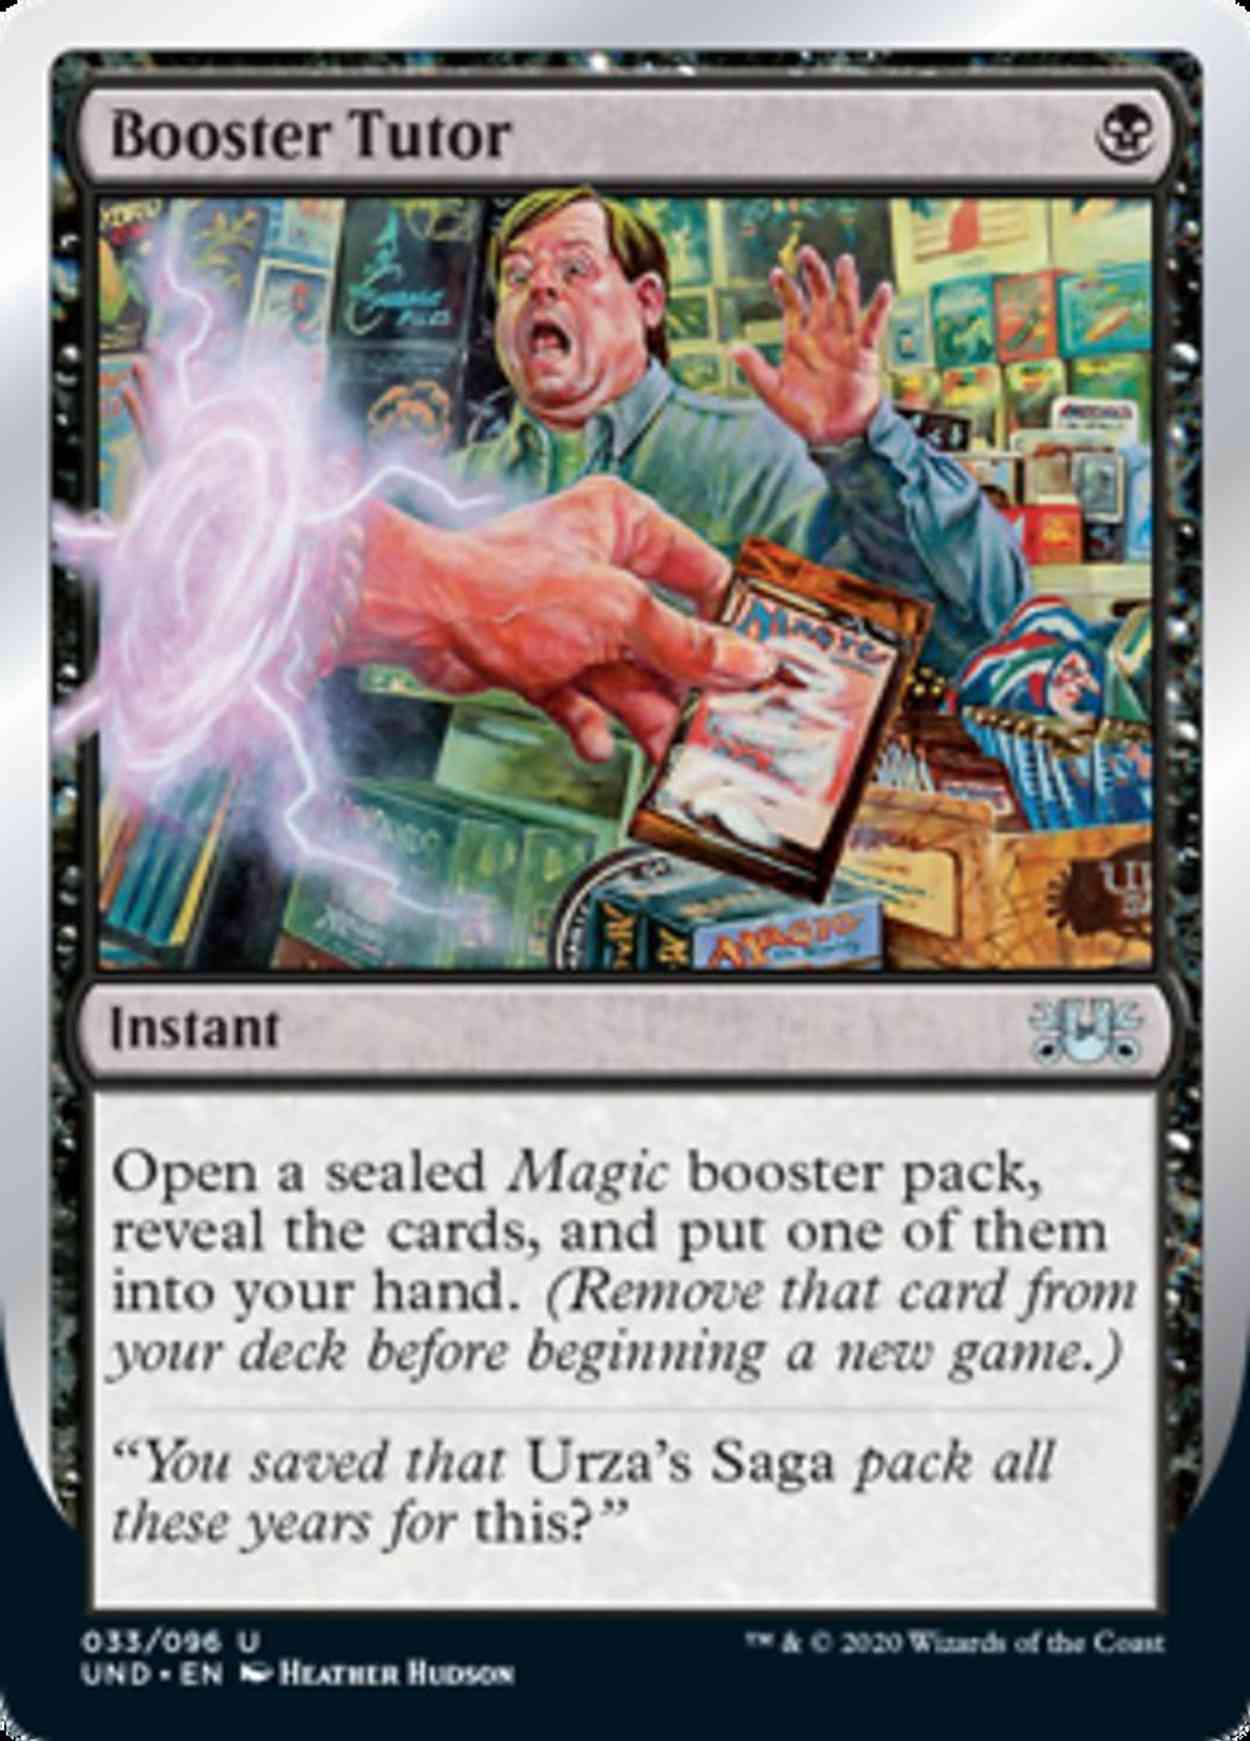 Booster Tutor magic card front